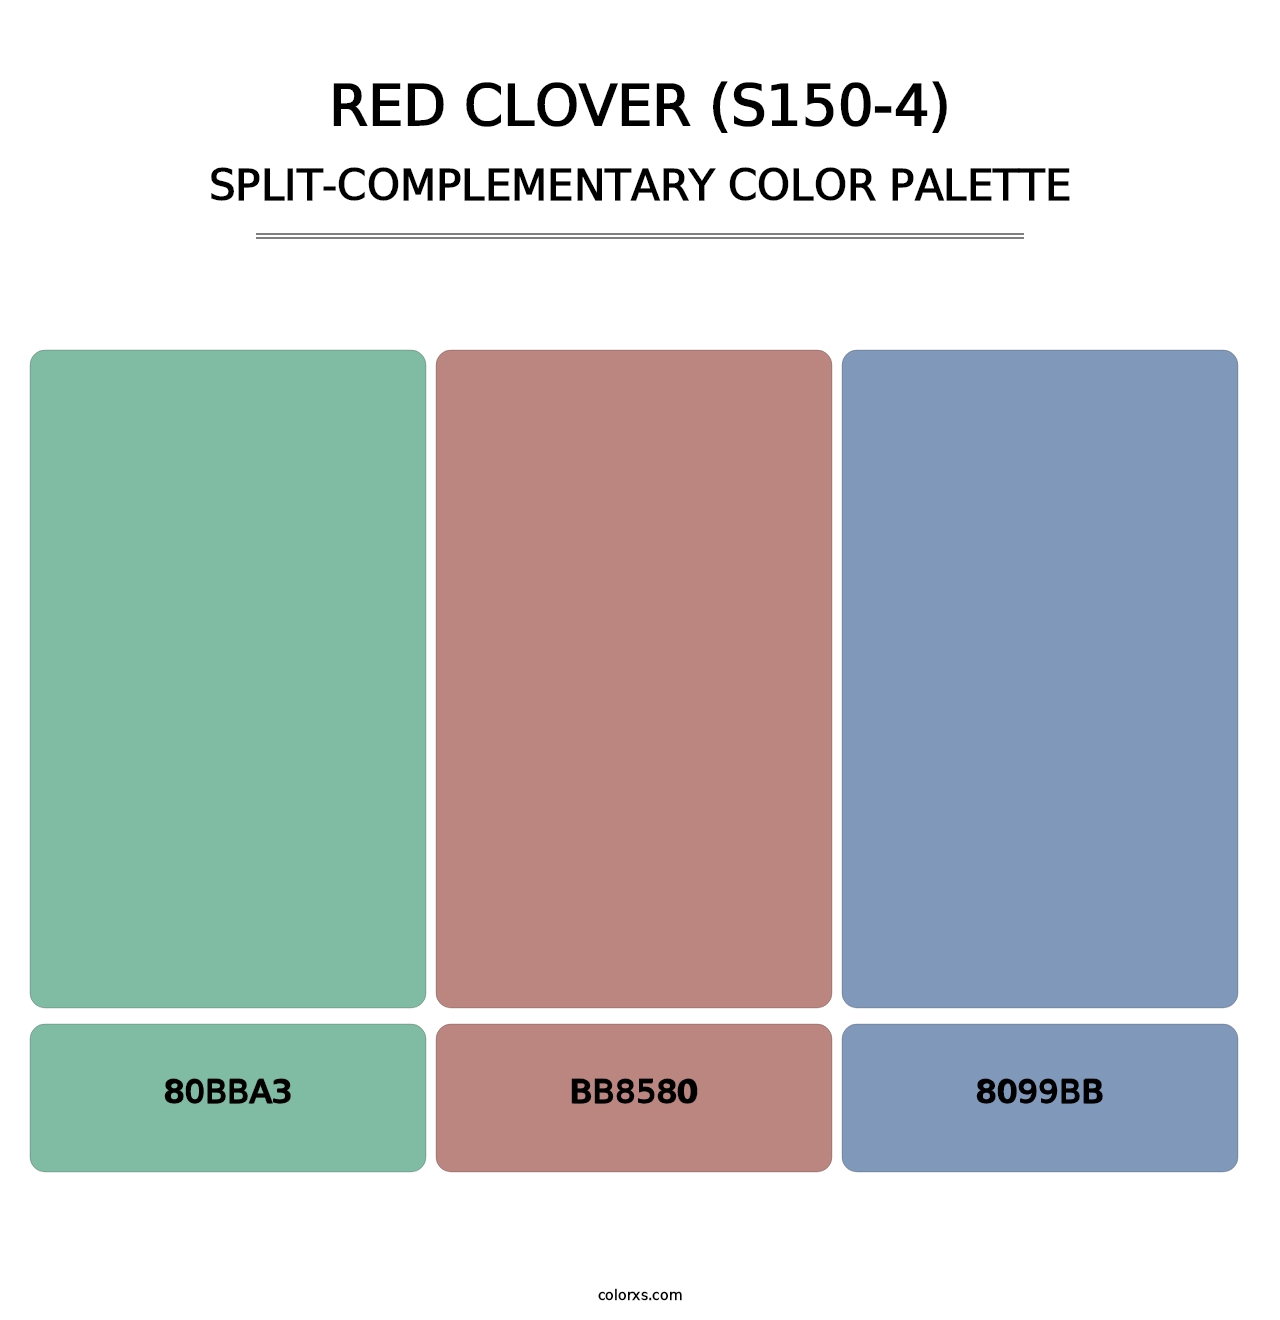 Red Clover (S150-4) - Split-Complementary Color Palette